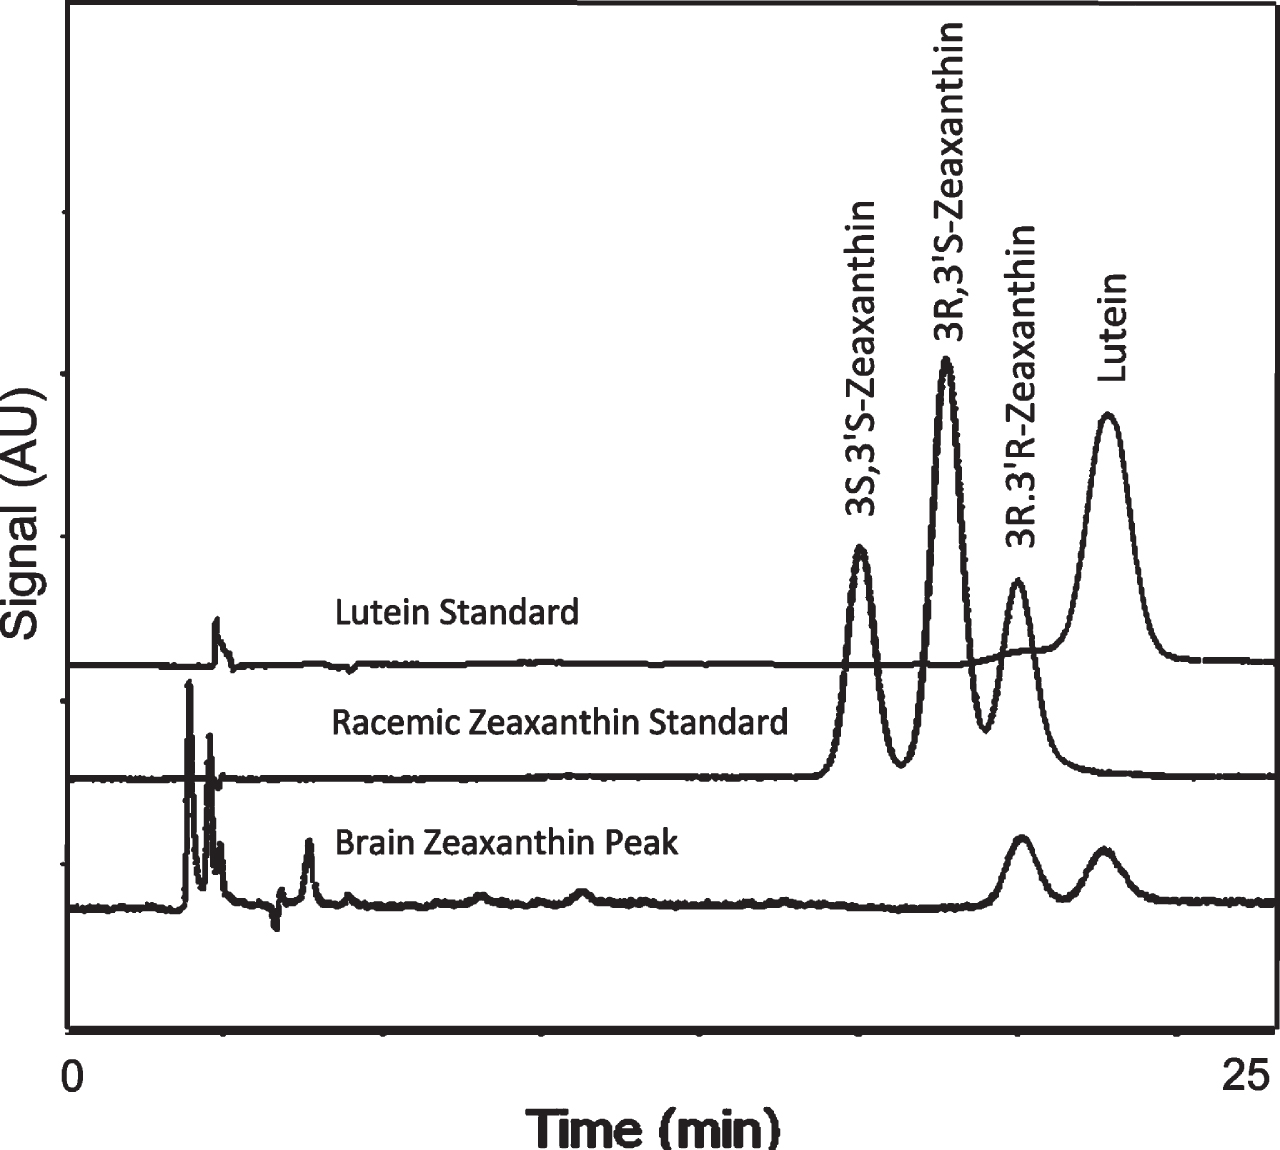 Separation of zeaxanthin optical isomers in a racemic mixture and in the brain zeaxanthin fraction collected during normal phase LC. Brain contained only the 3R, 3’R enantiomer of zeaxanthin.